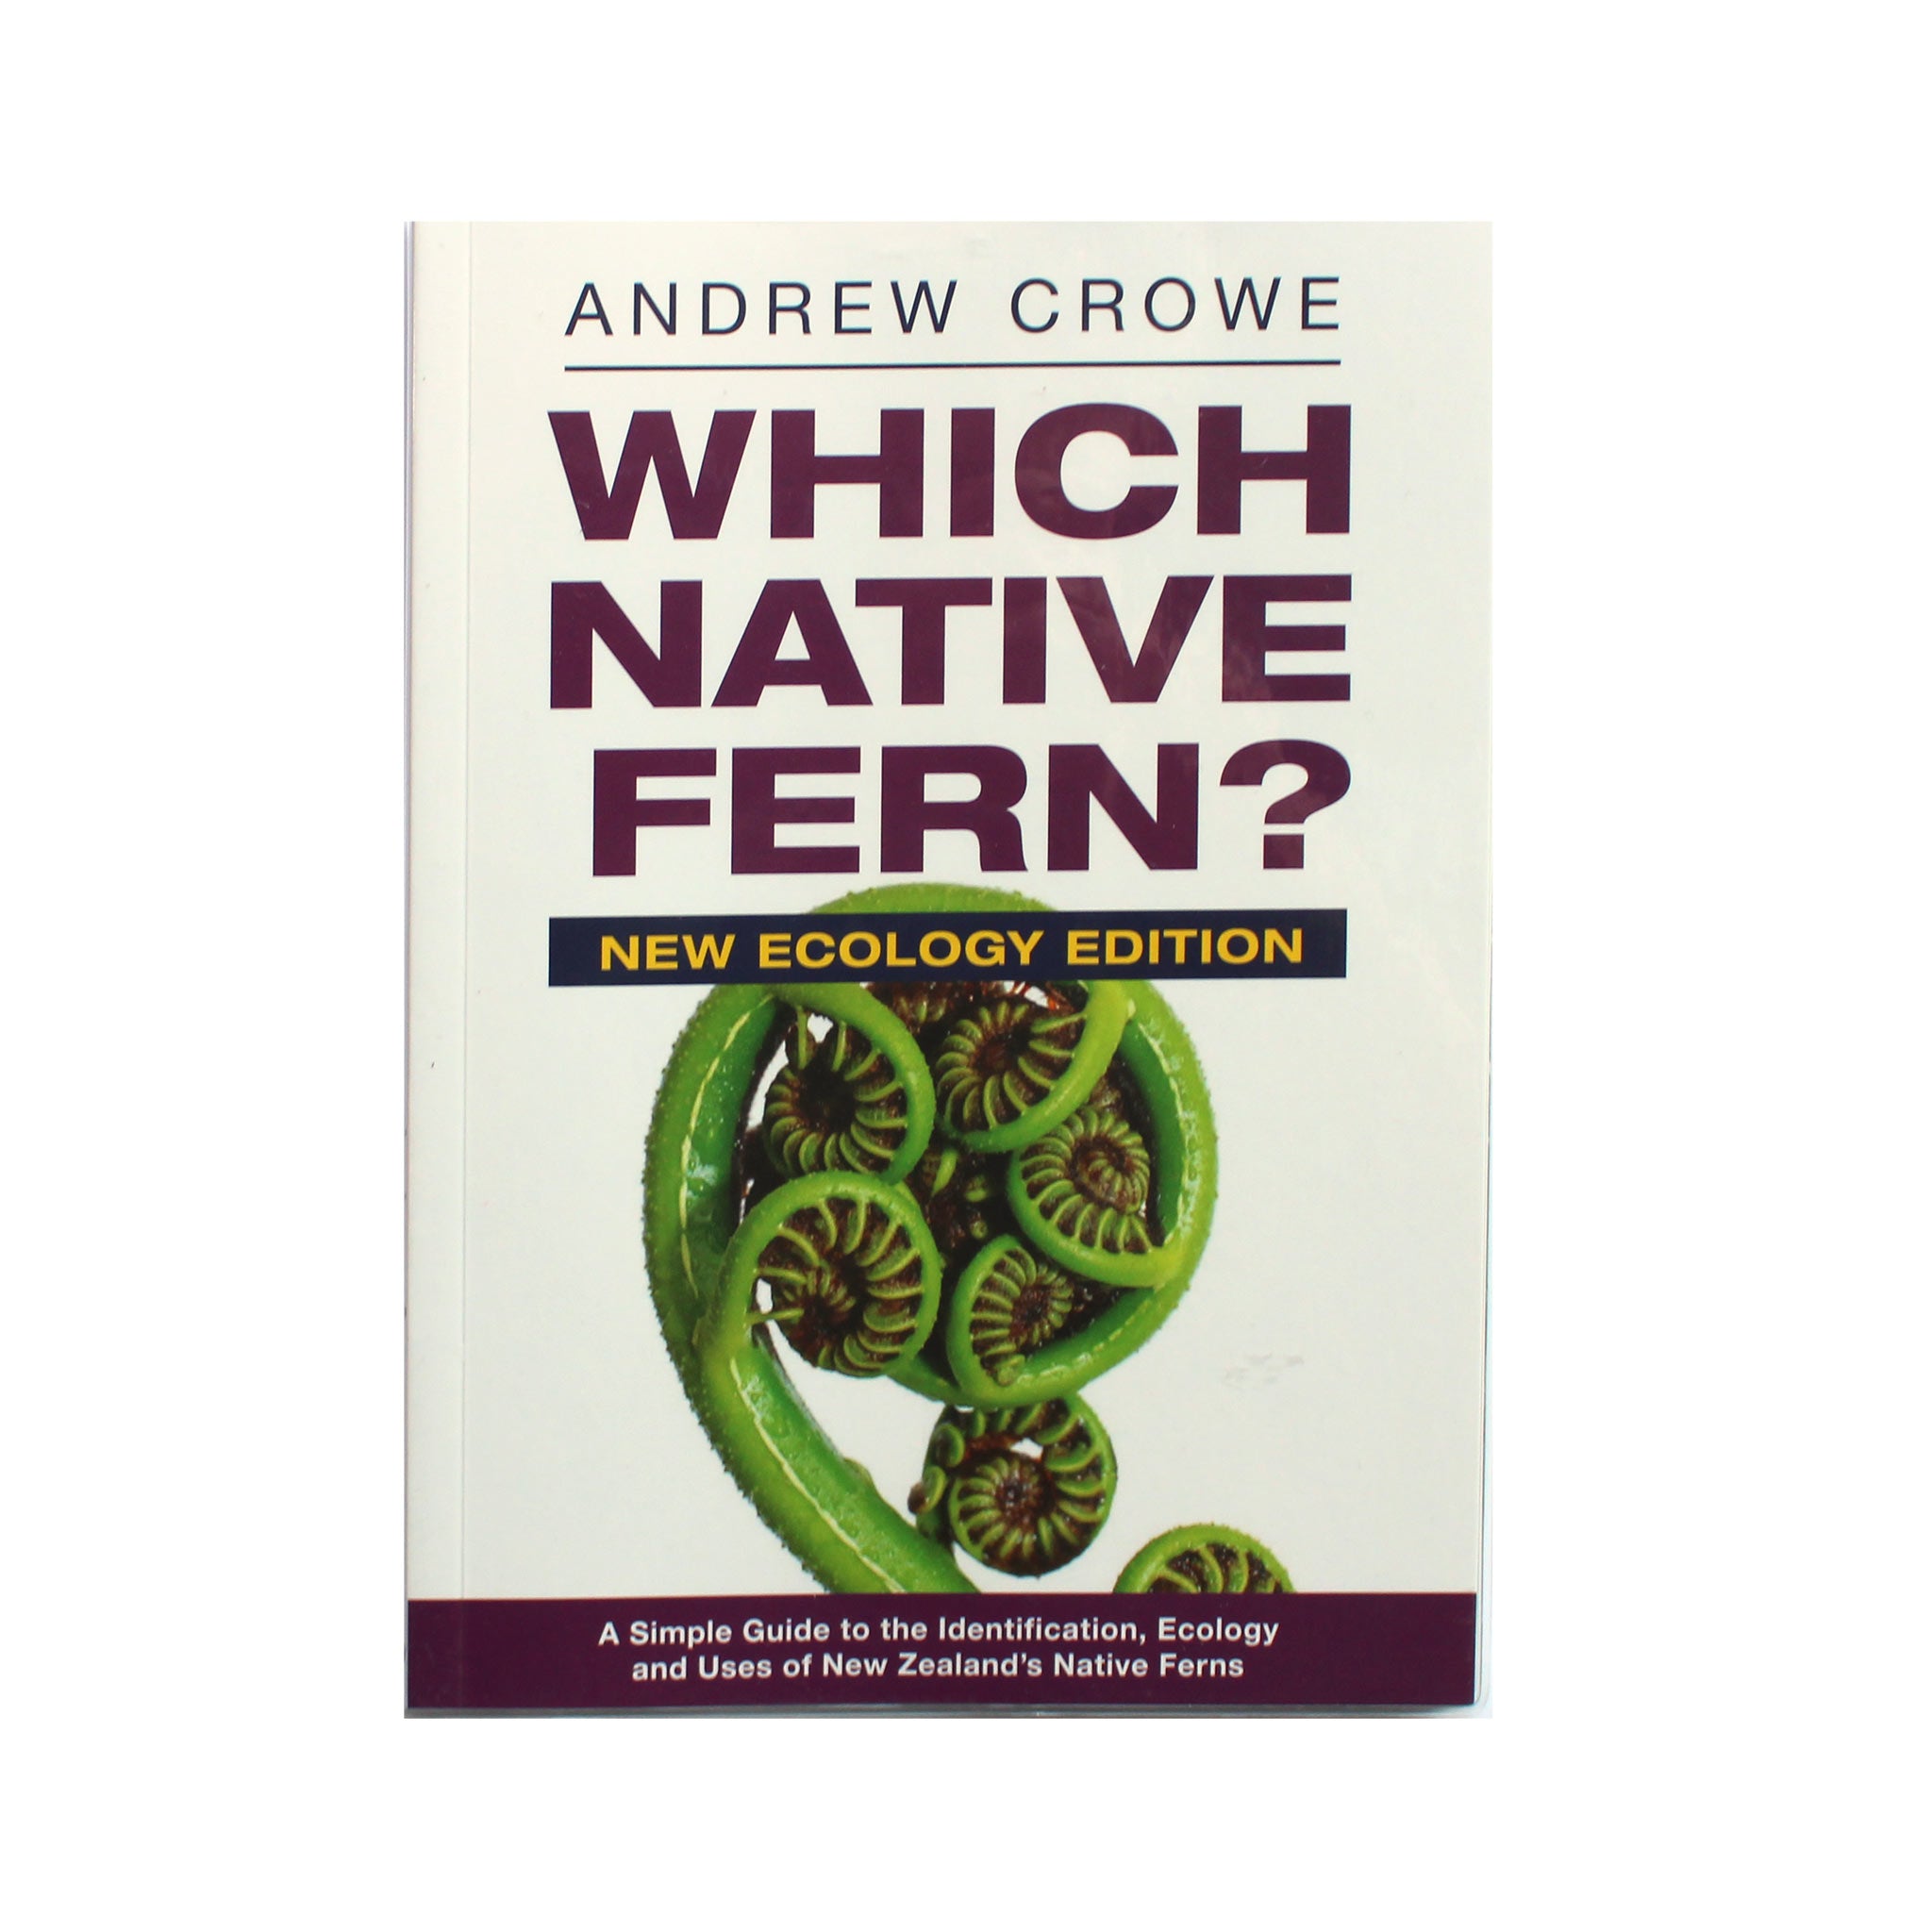 Which Native Fern? - New Ecology Edition